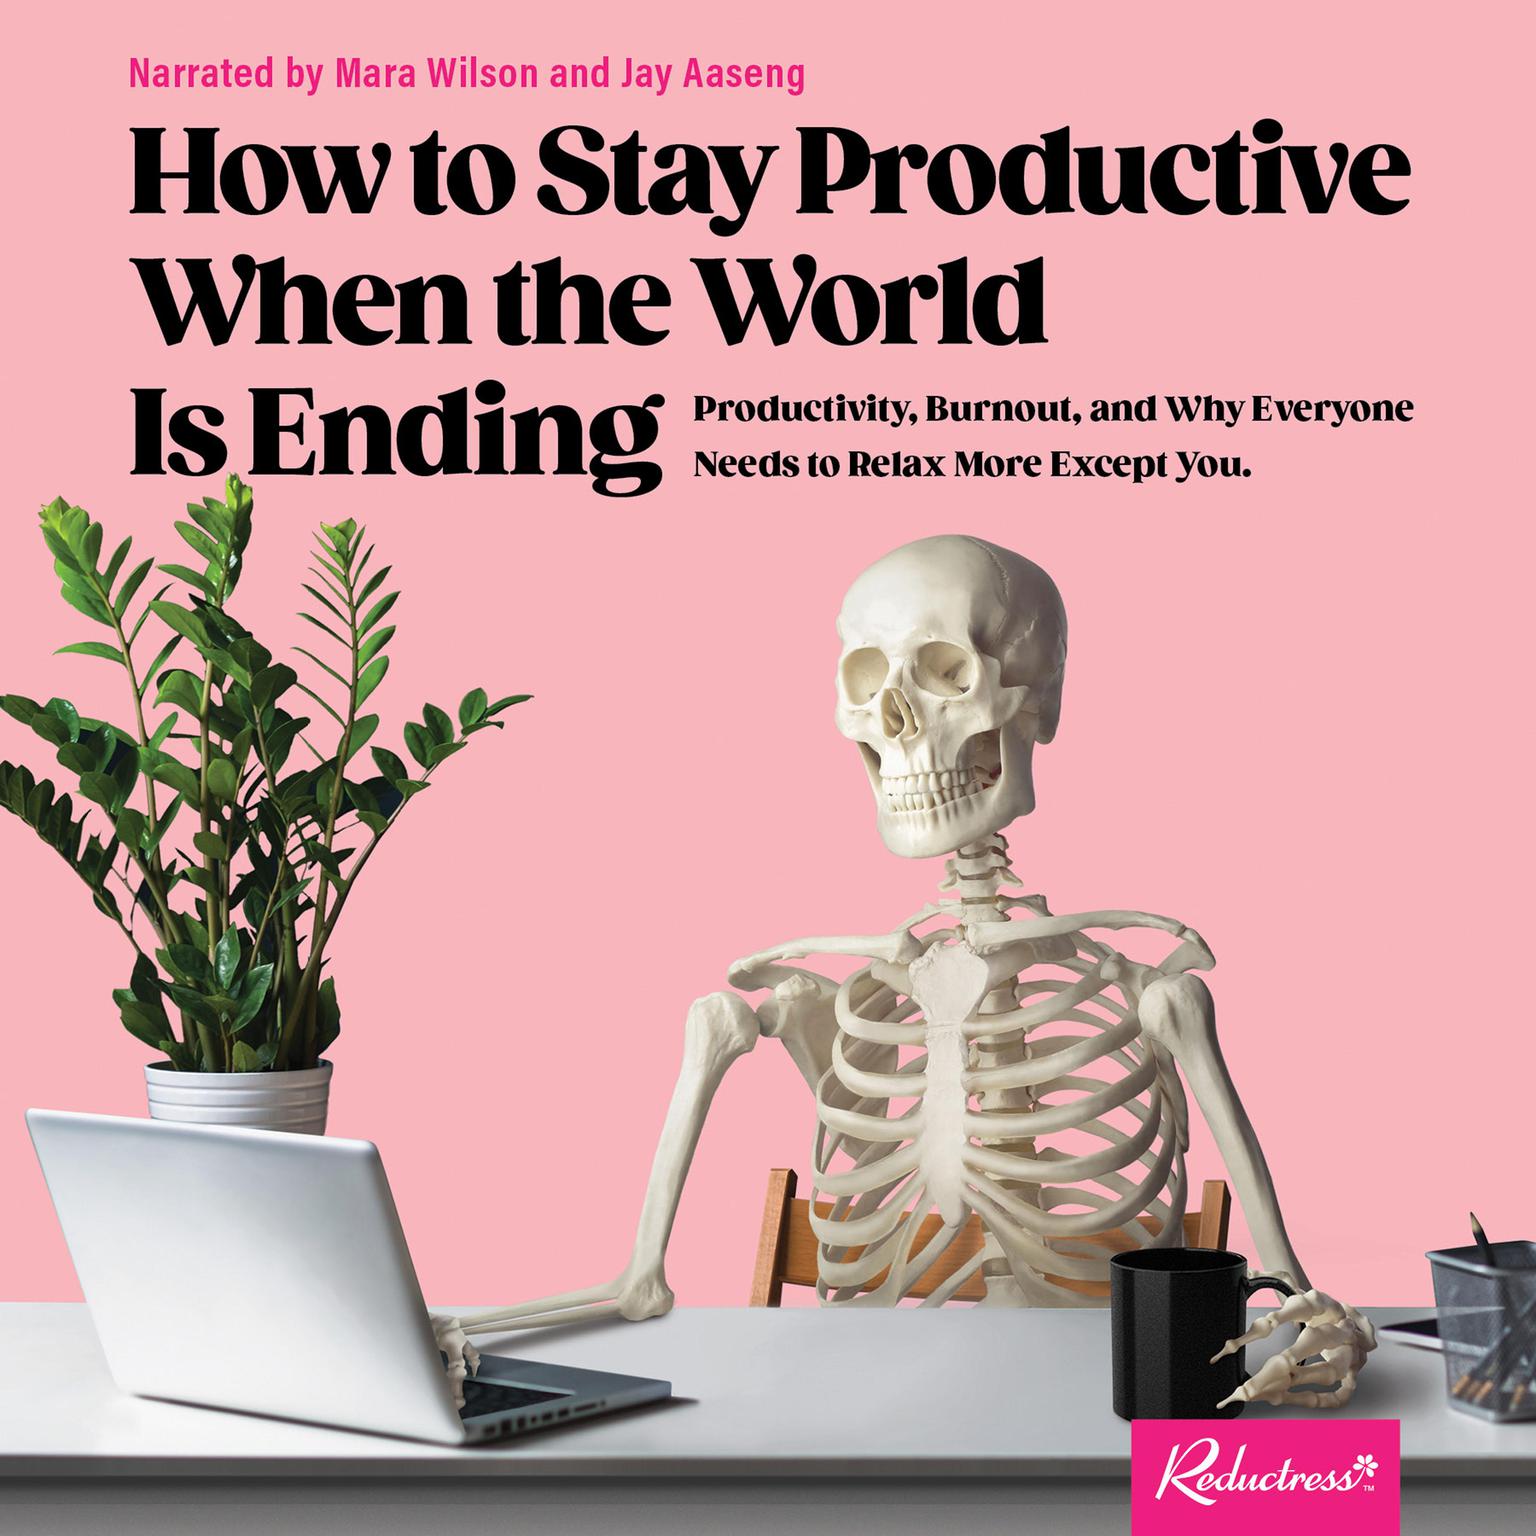 How to Stay Productive When the World Is Ending: Productivity, Burnout, and Why Everyone Needs to Relax More Except You Audiobook, by Reductress 